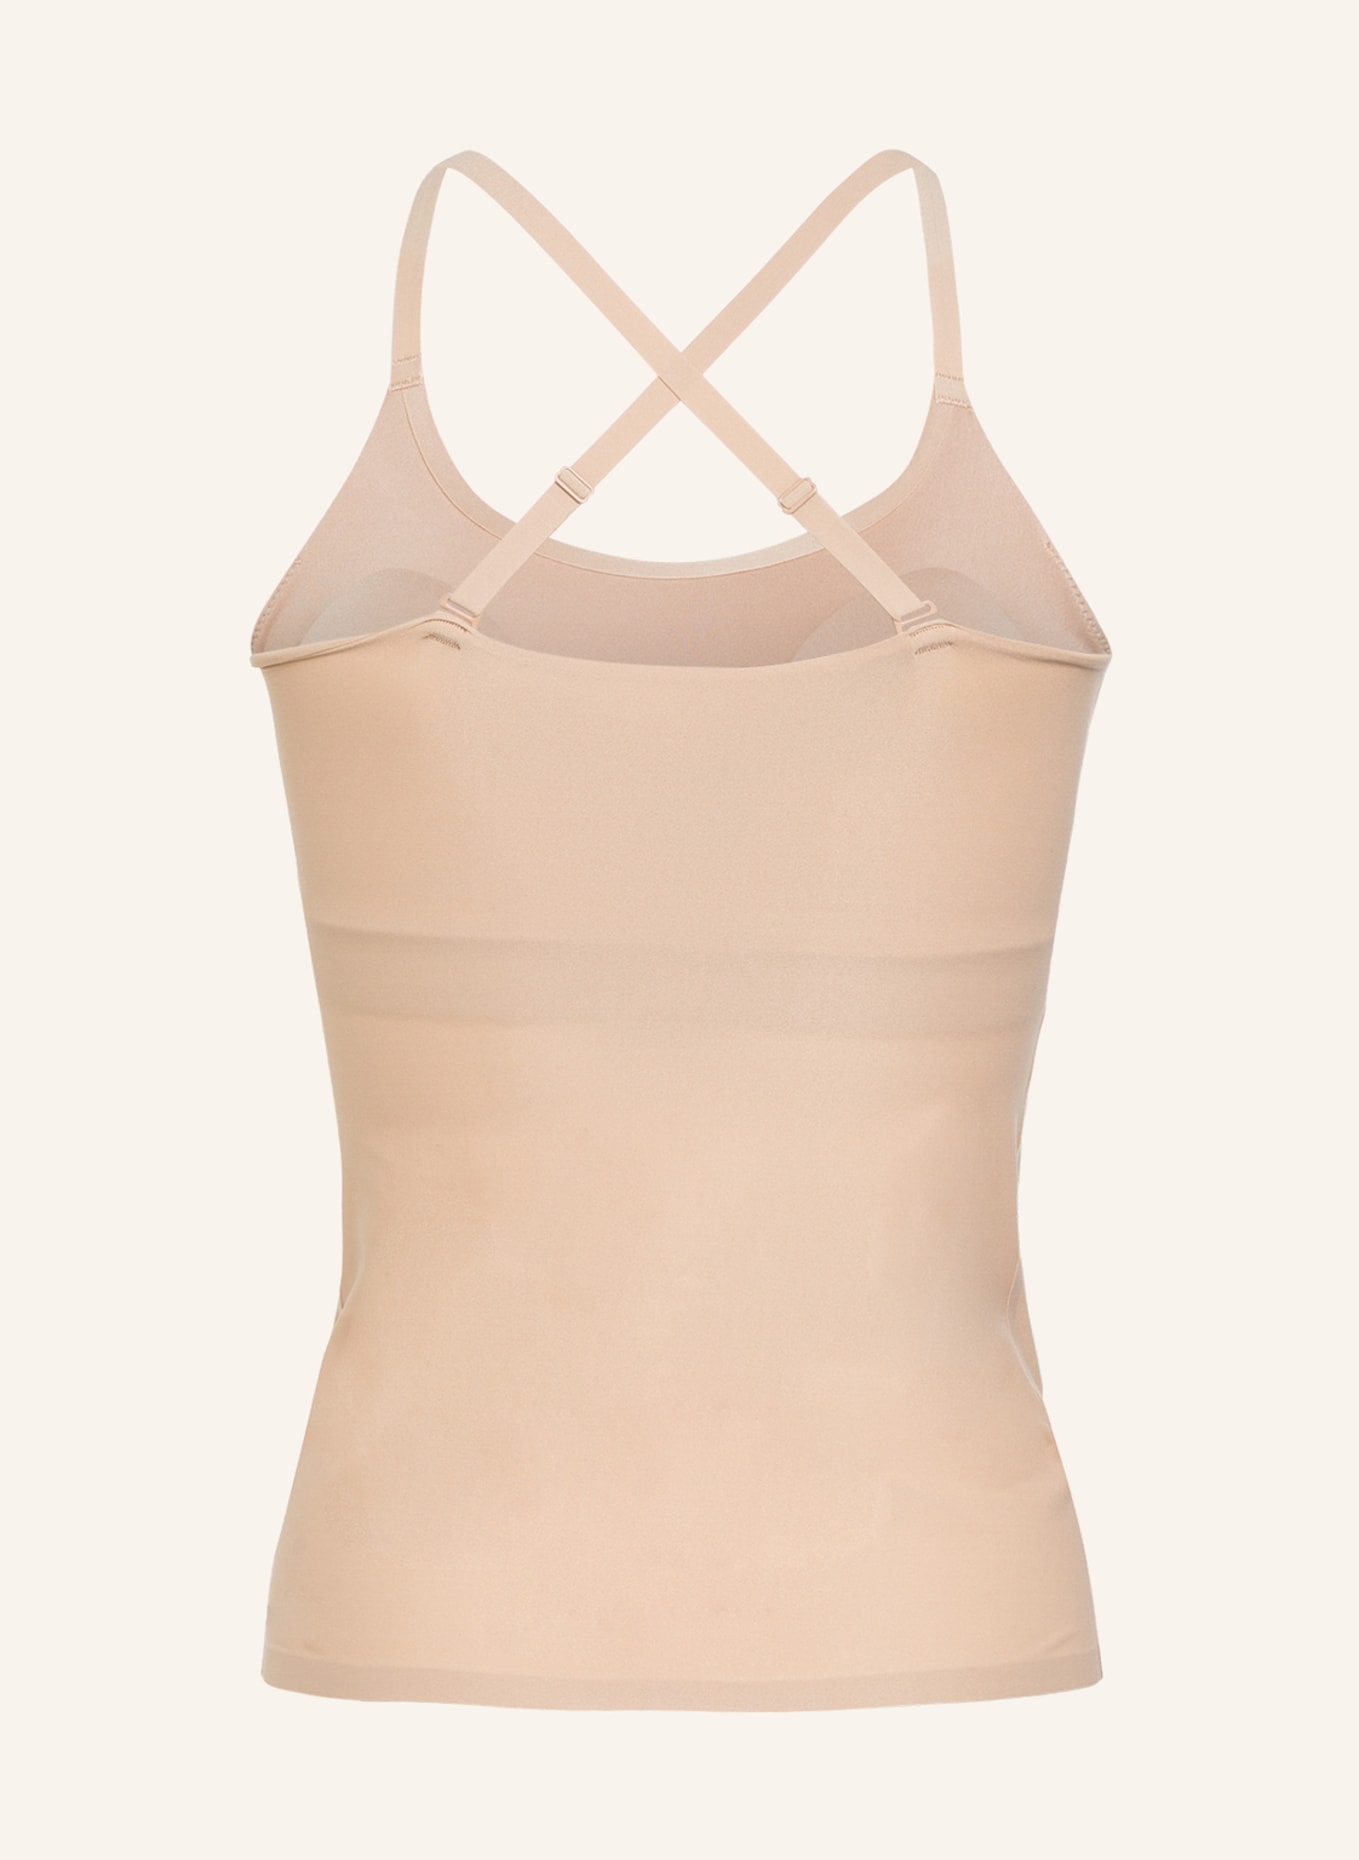 CHANTELLE Top SOFTSTRETCH mit Soft-Cups, Farbe: NUDE (Bild 3)